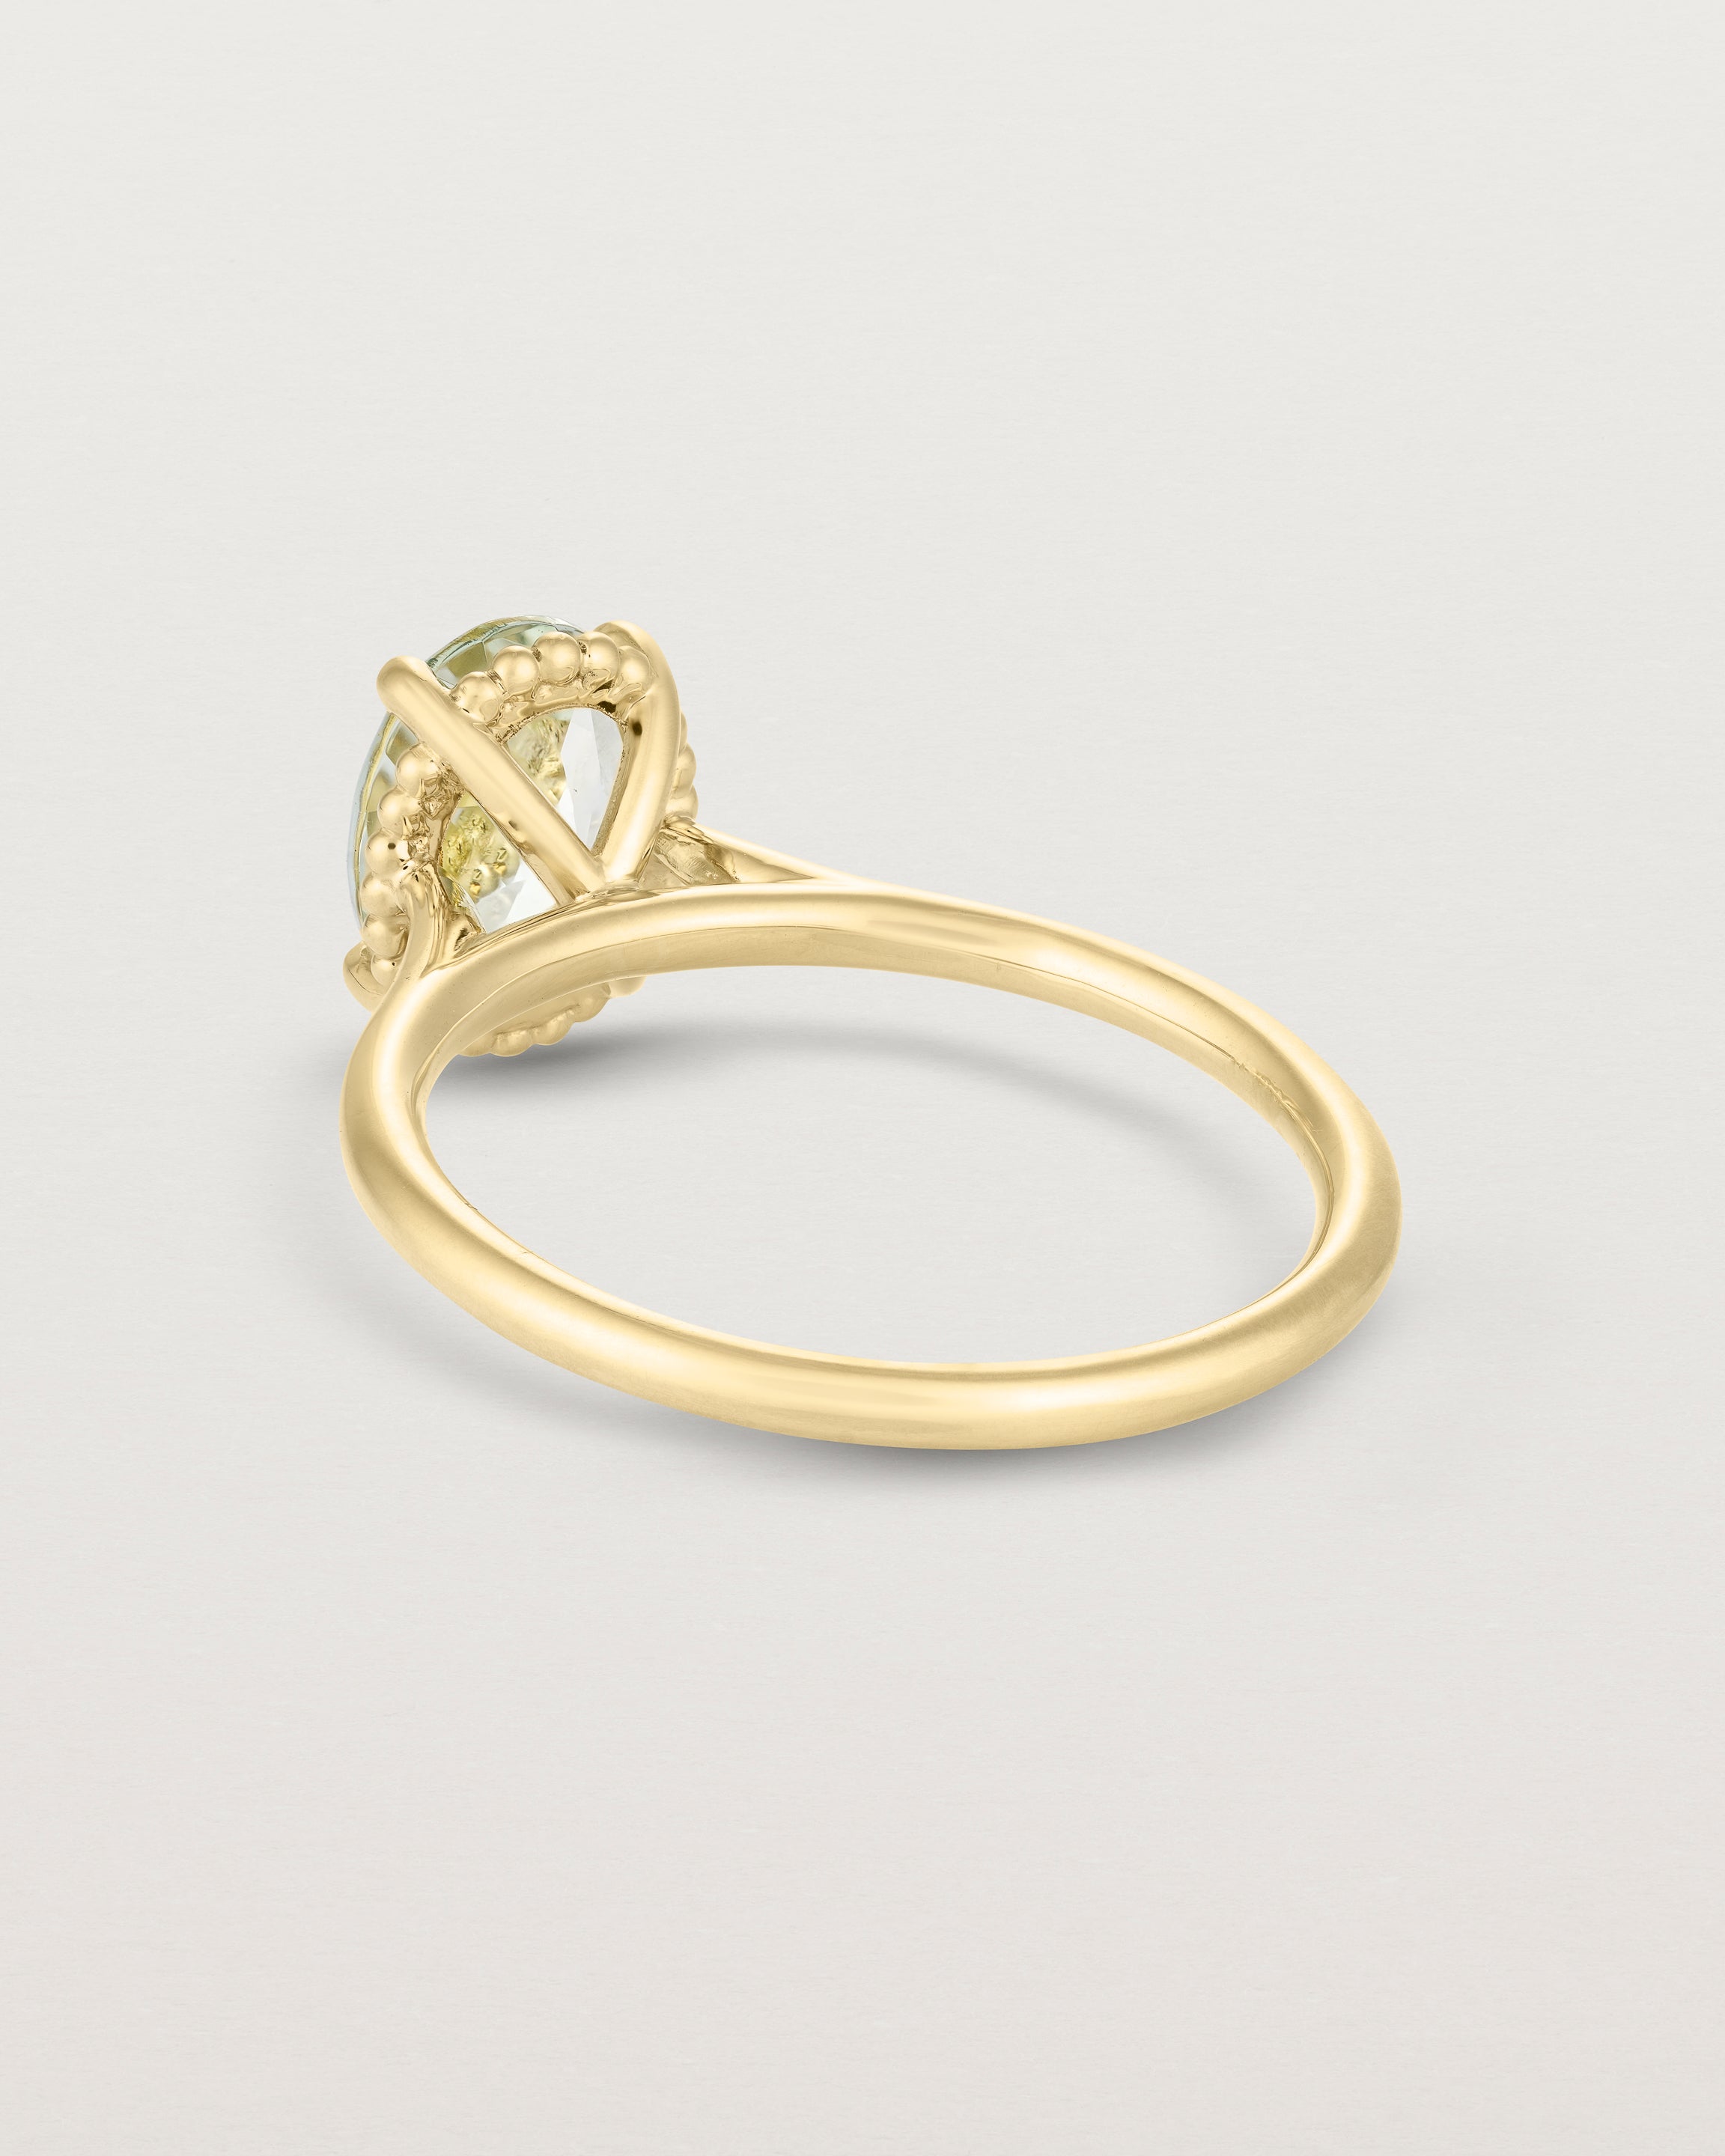 Back view of the Thea Oval Solitaire | Green Amethyst in yellow gold.